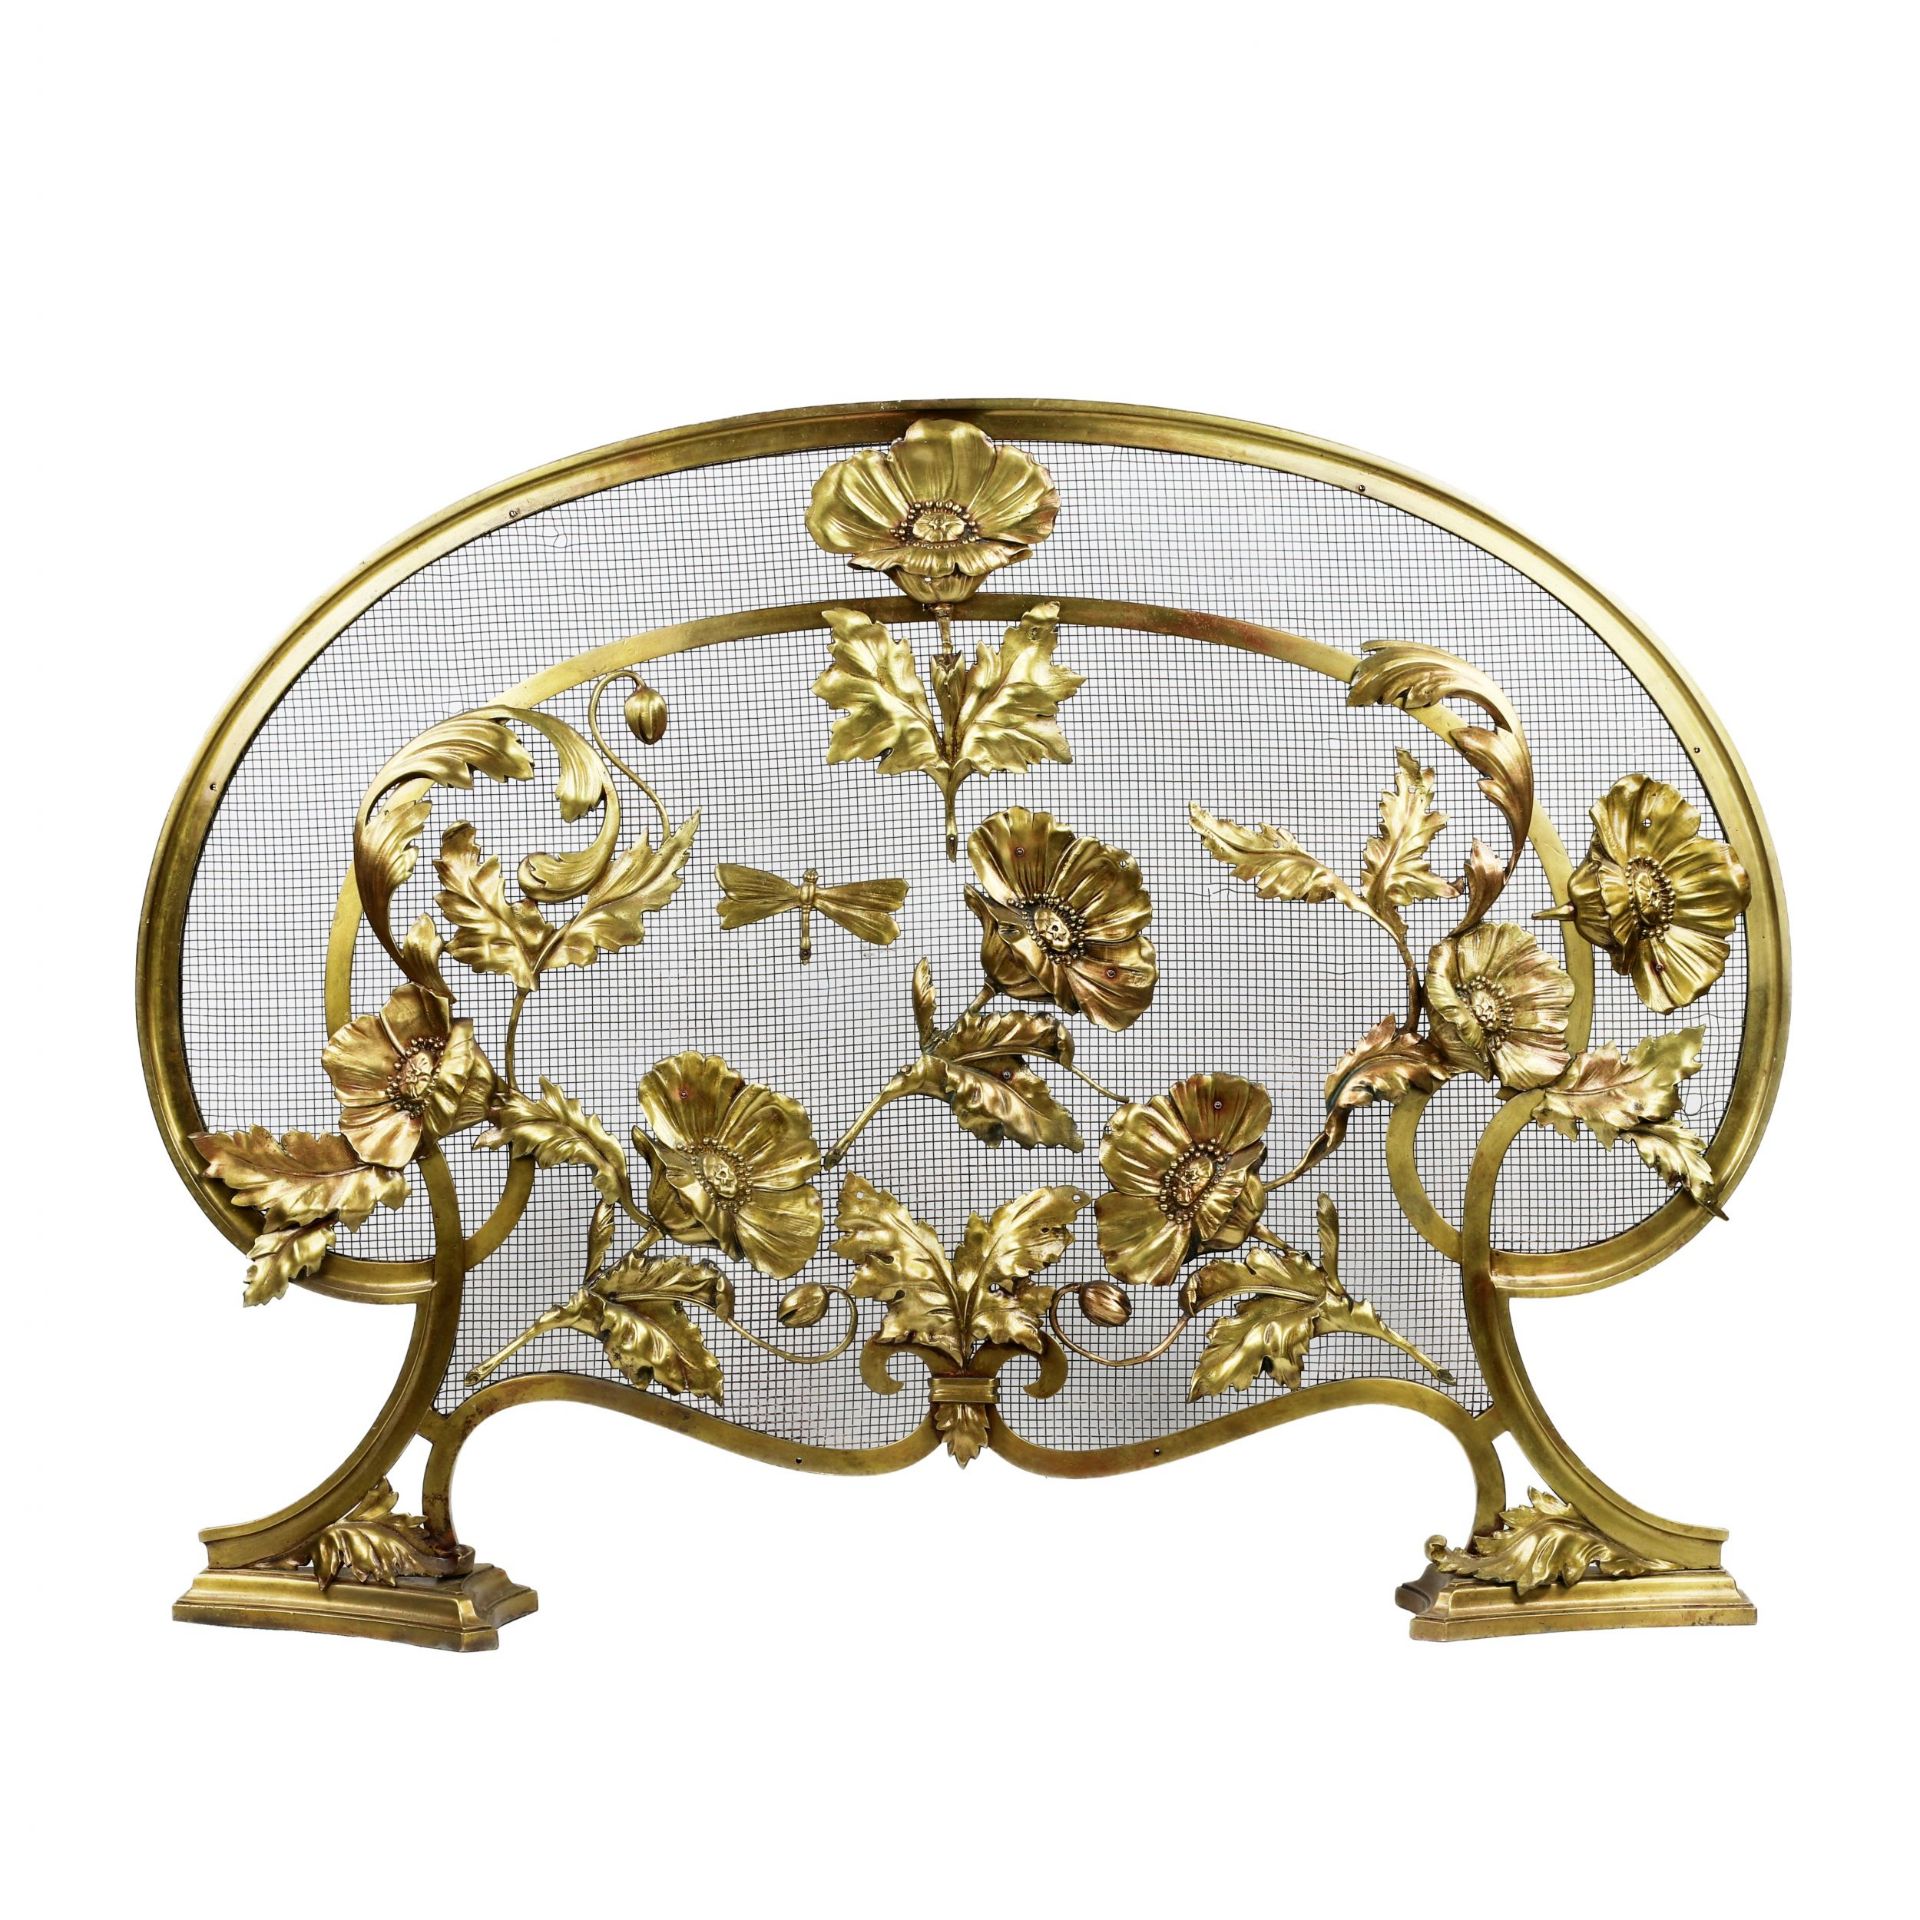 Elegant mantel screen in bronze, with poppies, in Art Nouveau style. France, around 1900